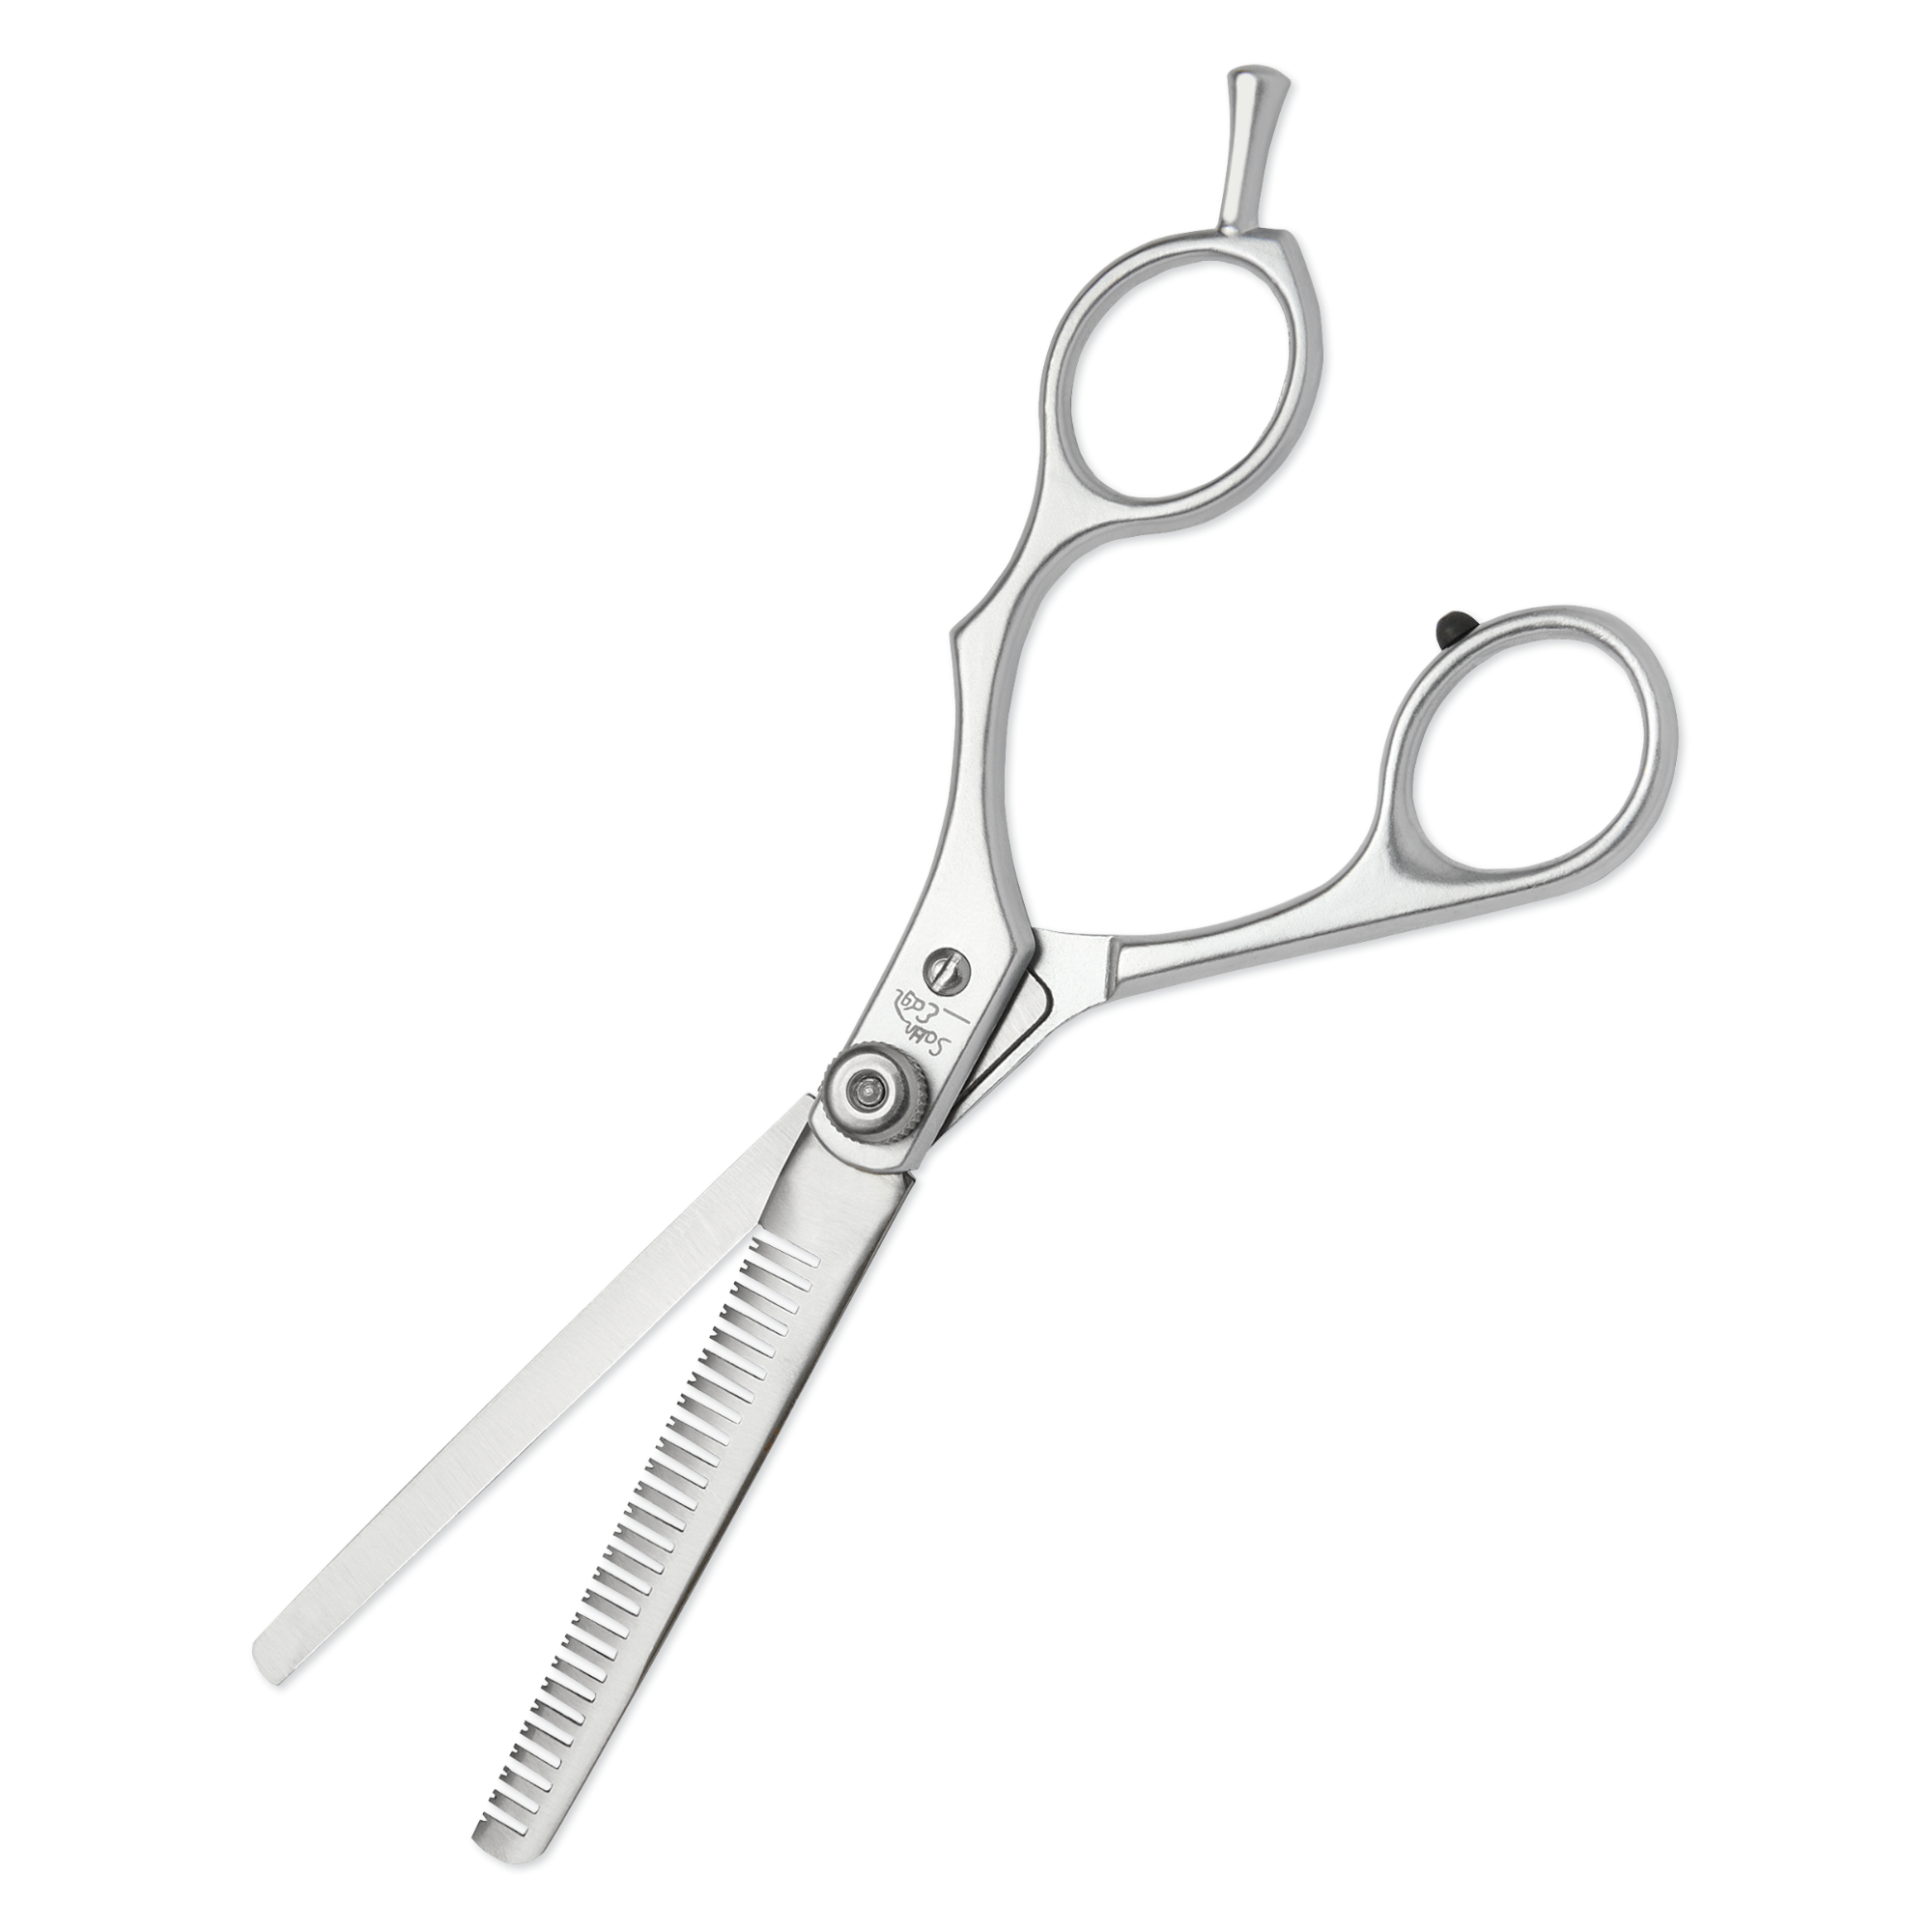 6-1/2" Stainless Steel, 30-Tooth Thinning Shear